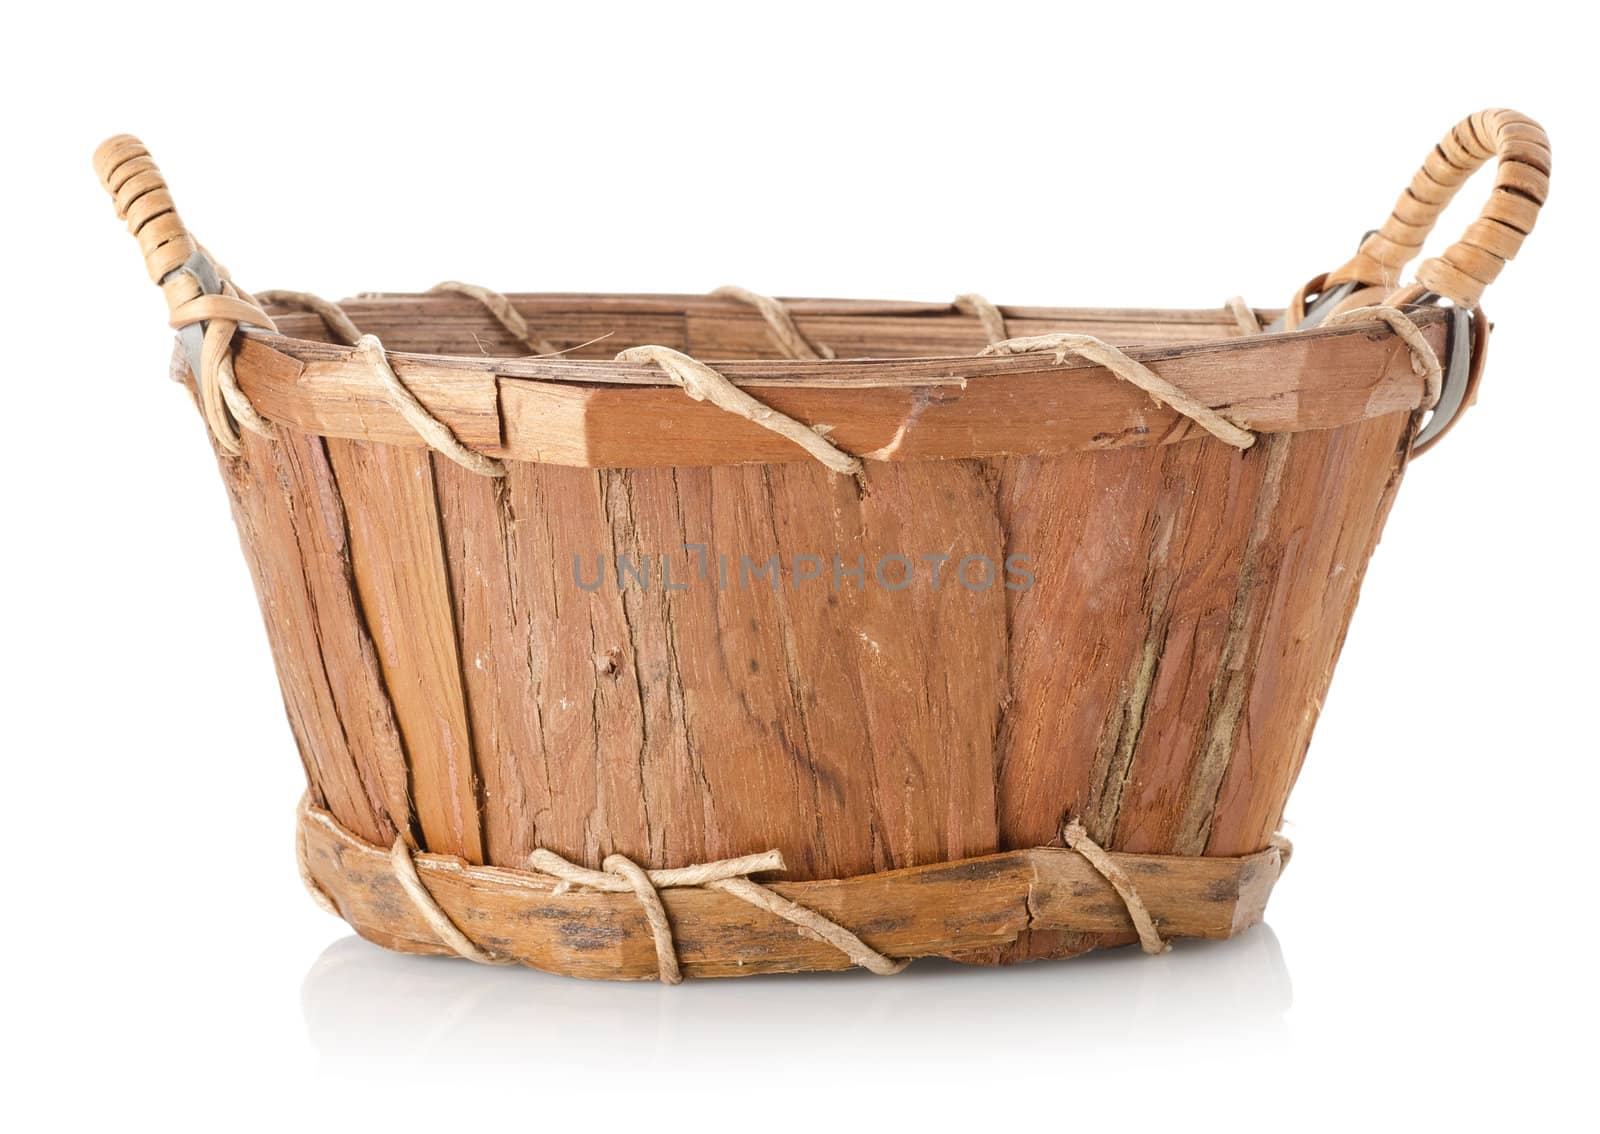 Wooden wattled basket isolated on a white background